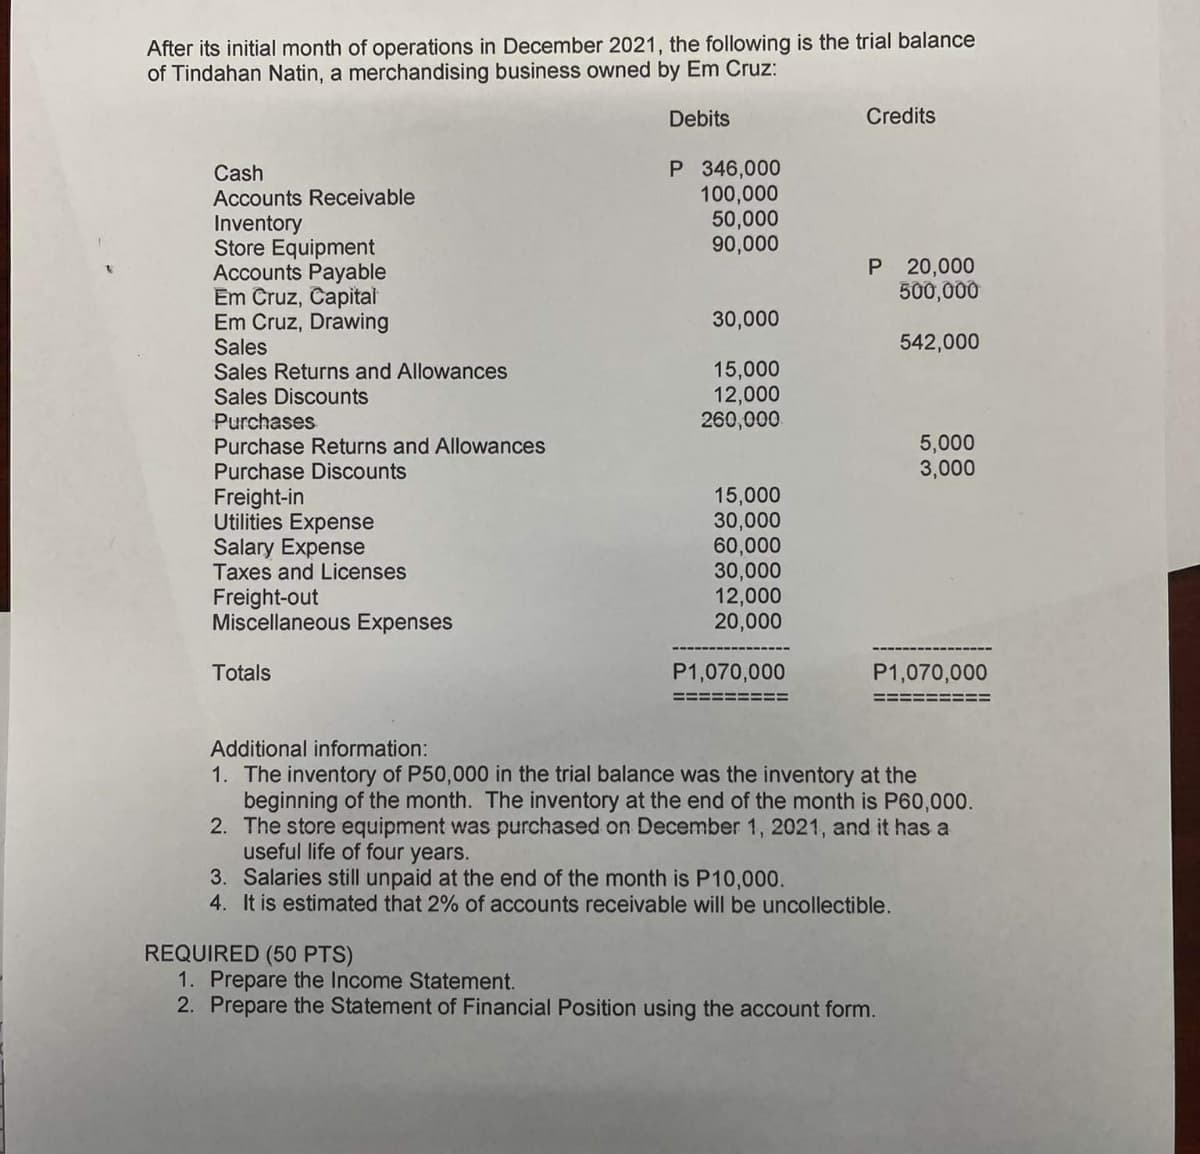 After its initial month of operations in December 2021, the following is the trial balance
of Tindahan Natin, a merchandising business owned by Em Cruz:
Debits
Credits
P 346,000
100,000
50,000
90,000
Cash
Accounts Receivable
Inventory
Store Equipment
Accounts Payable
Em Cruz, Capital
Em Cruz, Drawing
Sales
Sales Returns and Allowances
Sales Discounts
Purchases
Purchase Returns and Allowances
Purchase Discounts
Freight-in
Utilities Expense
Salary Expense
Taxes and Licenses
Freight-out
Miscellaneous Expenses
P 20,000
500,000
30,000
542,000
15,000
12,000
260,000
5,000
3,000
15,000
30,000
60,000
30,000
12,000
20,000
Totals
P1,070,000
P1,070,000
Additional information:
1. The inventory of P50,000 in the trial balance was the inventory at the
beginning of the month. The inventory at the end of the month is P60,000.
2. The store equipment was purchased on December 1, 2021, and it has a
useful life of four years.
3. Salaries still unpaid at the end of the month is P10,000.
4. It is estimated that 2% of accounts receivable will be uncollectible.
REQUIRED (50 PTS)
1. Prepare the Income Statement.
2. Prepare the Statement of Financial Position using the account form.
